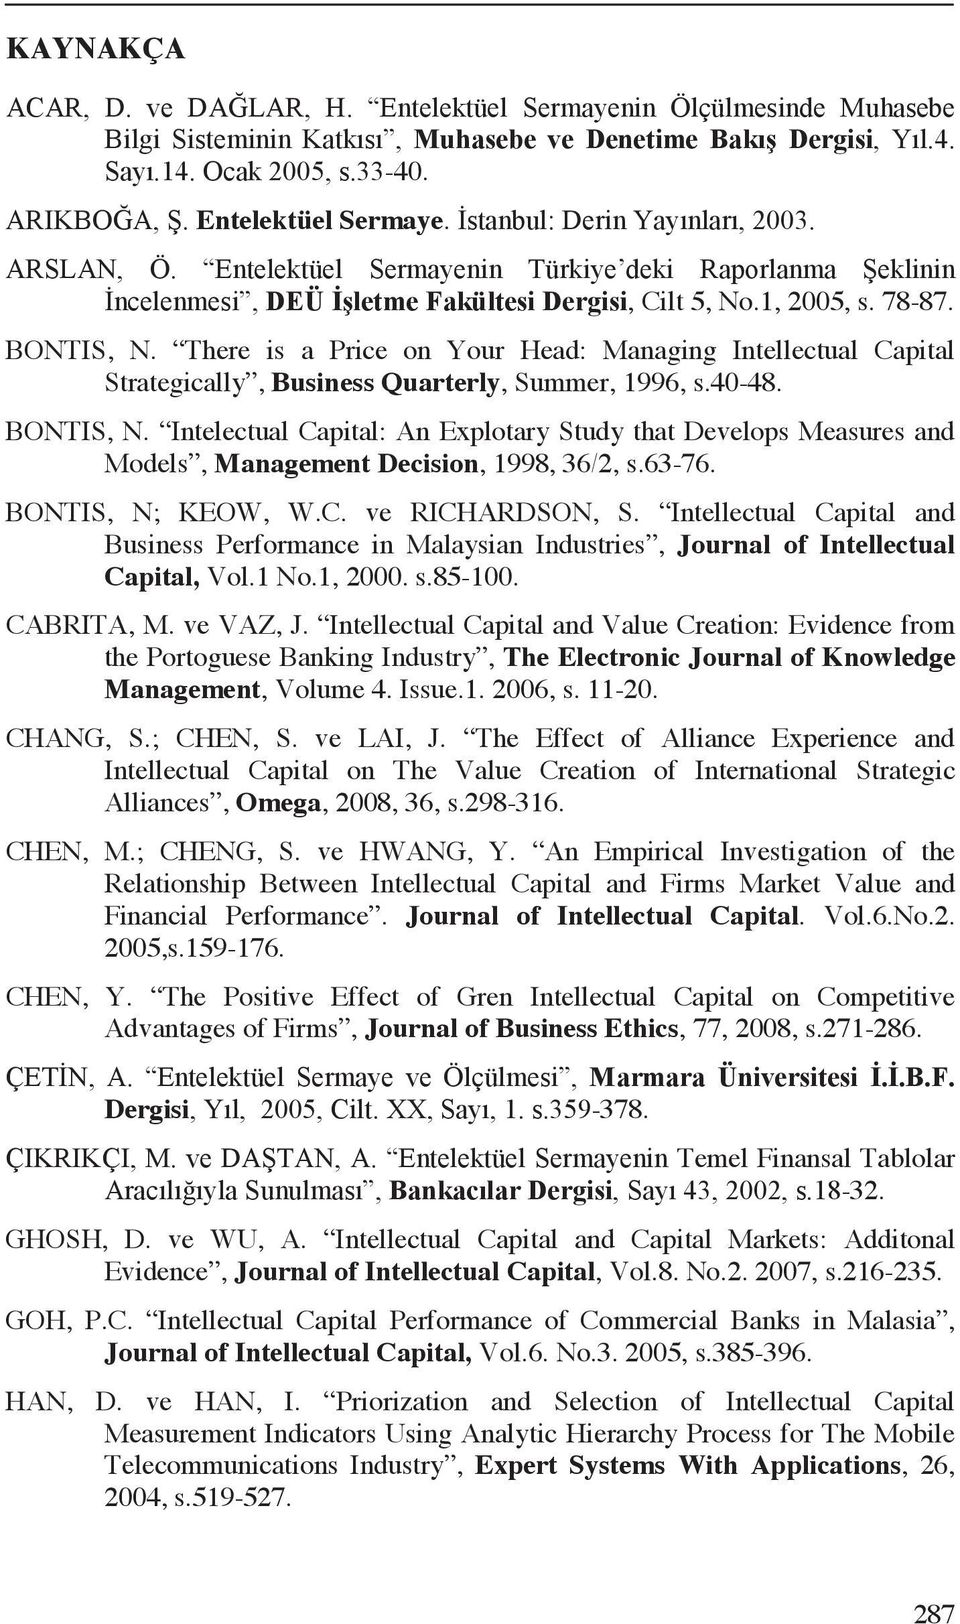 Intellectual Capital and Business Performance in Malaysian Industries, Journal of Intellectual Capital, Vol.1 No.1, 2000. s.85-100. CABRITA, M. ve VAZ, J.